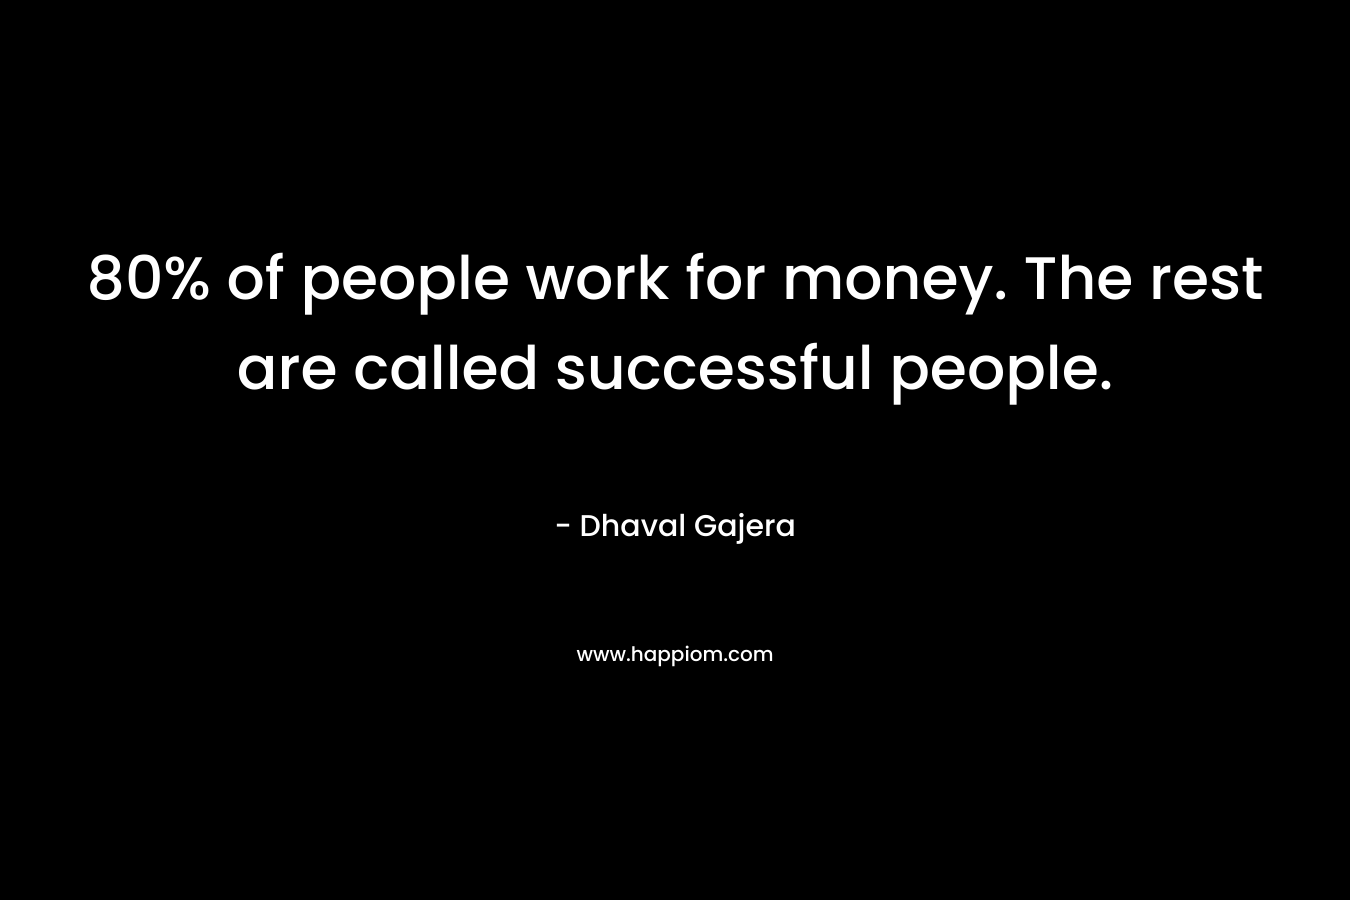 80% of people work for money. The rest are called successful people.